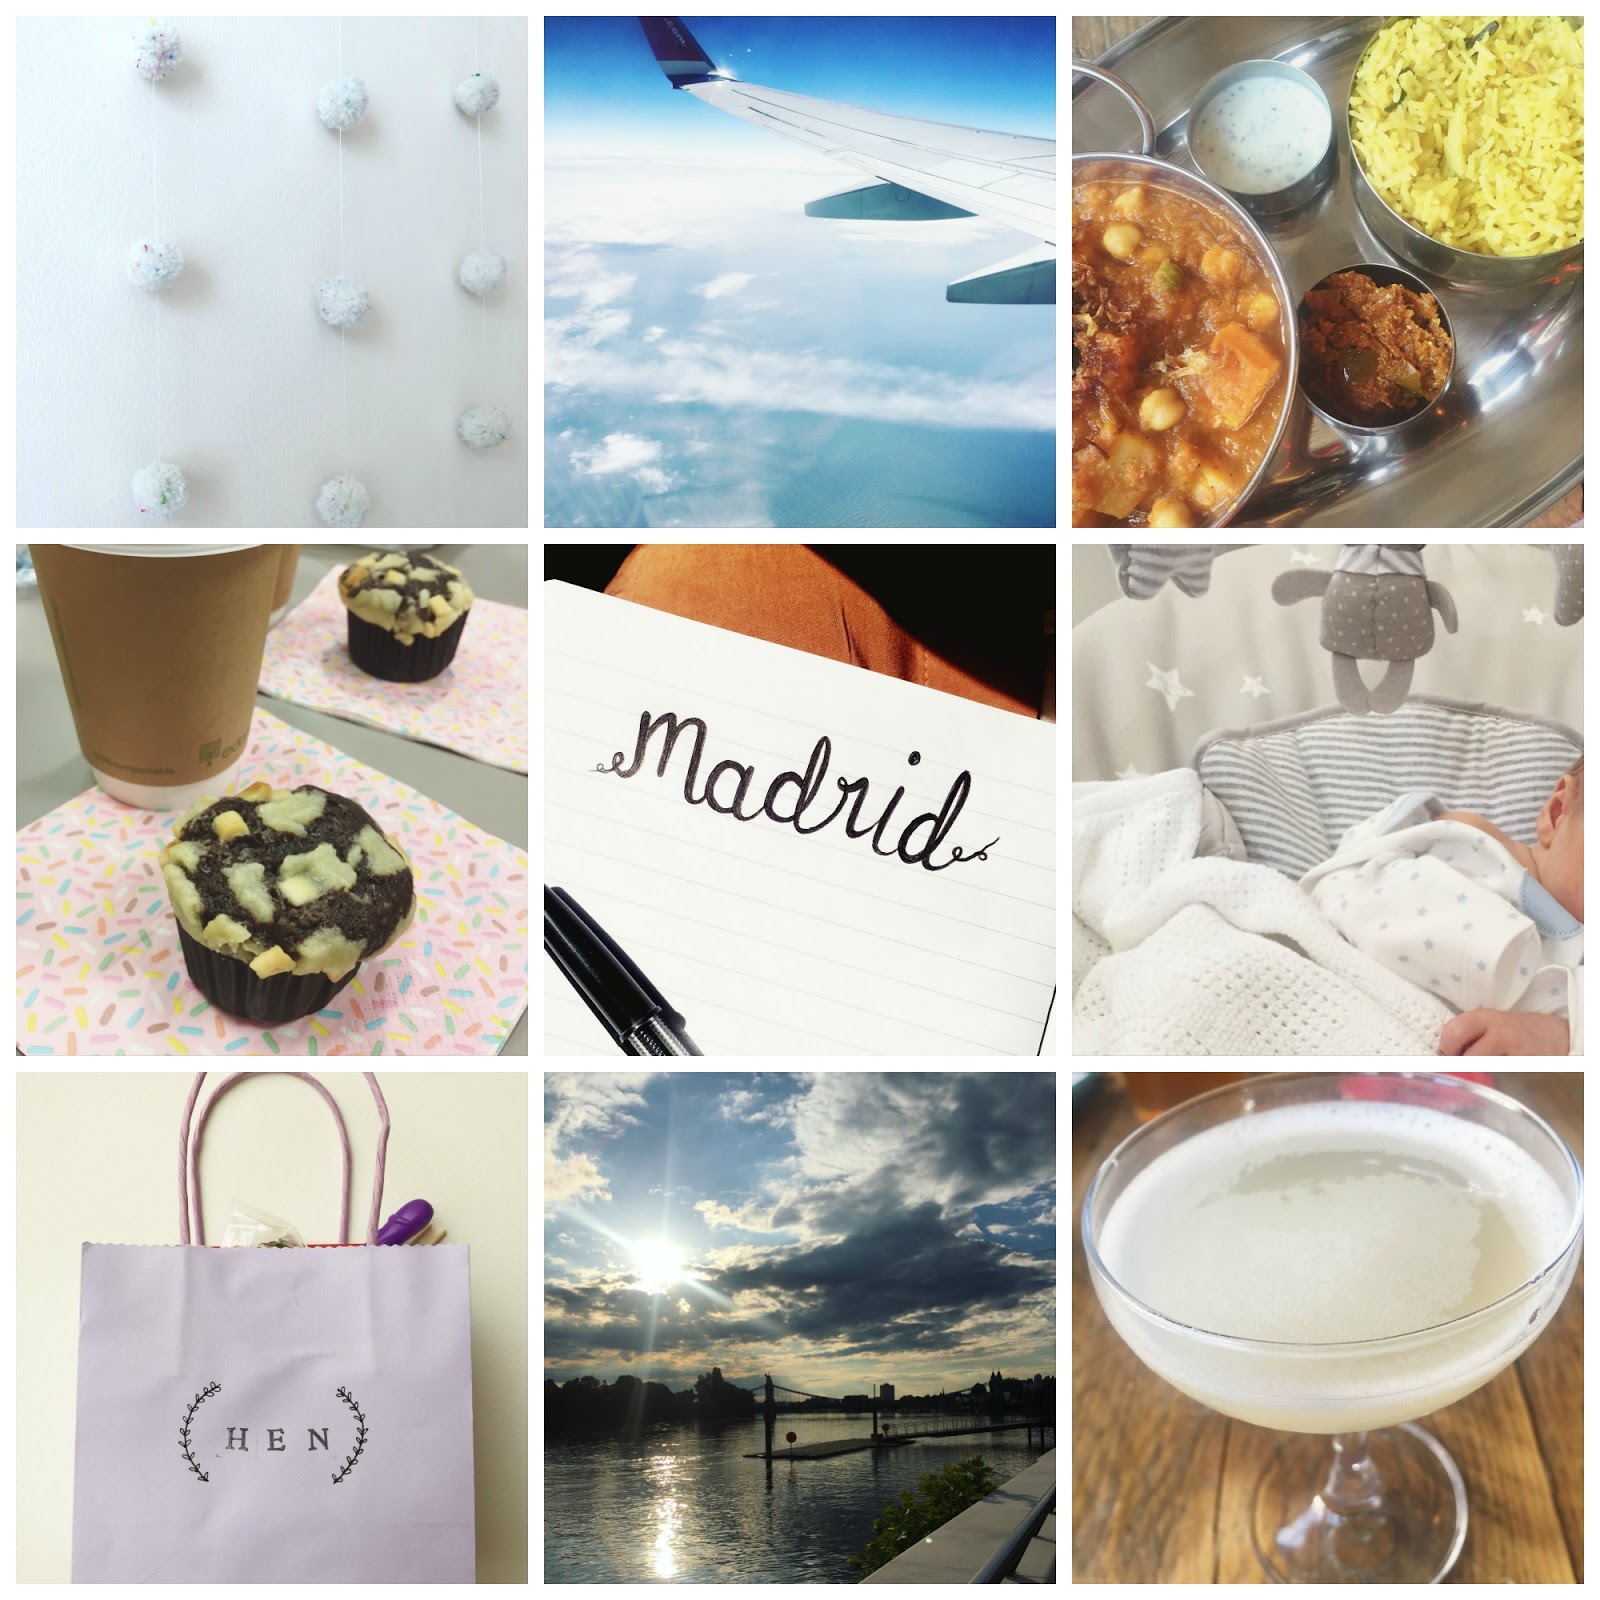 My June 2016 Done List by Isoscella